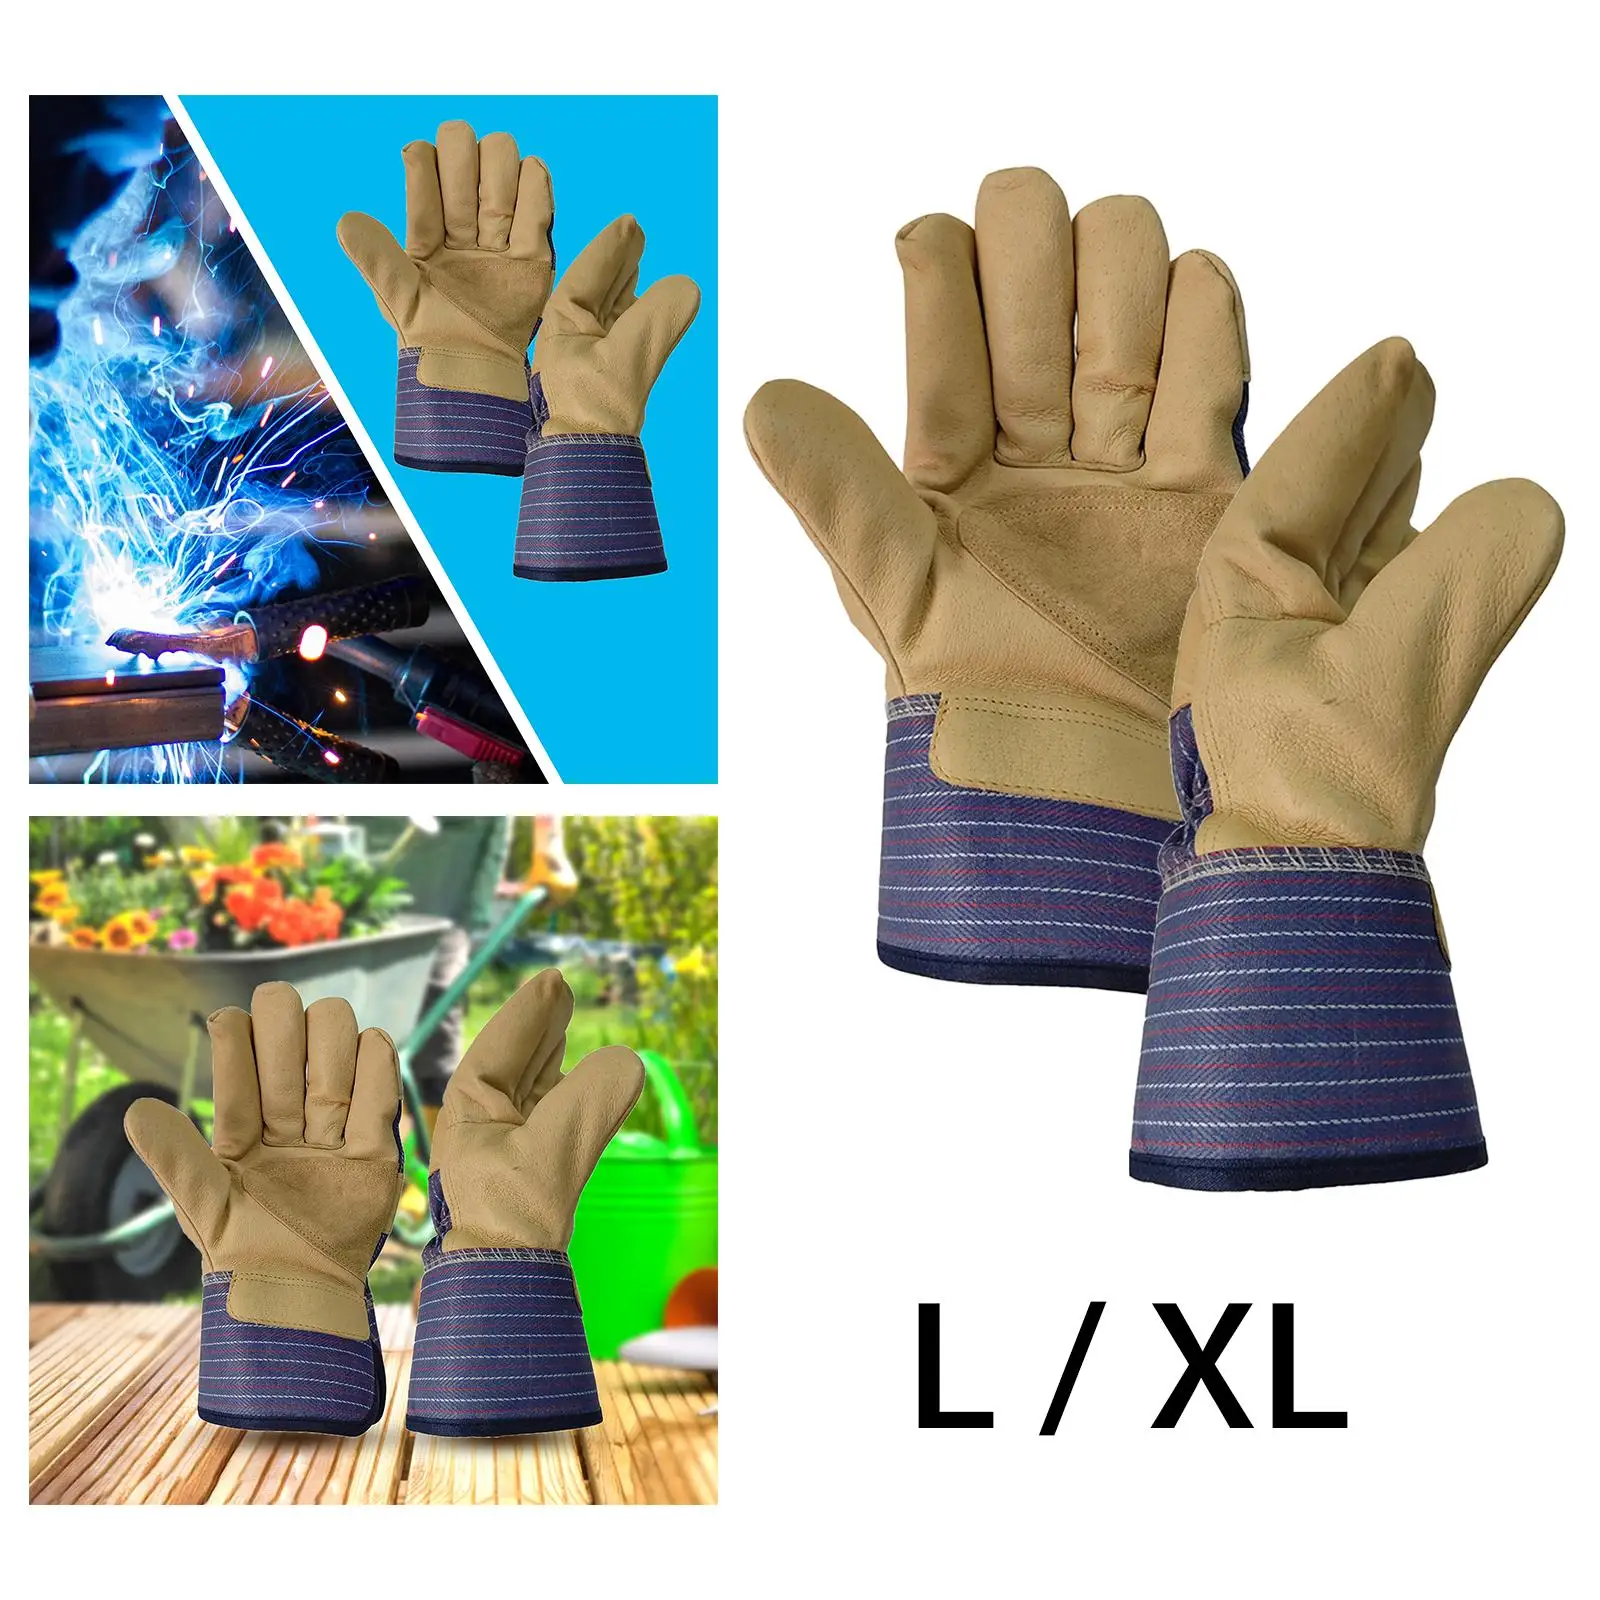 Welding Gloves Durable Heat Insulation Wear Resistant Heavy Duty Heat/Fire Resistant Mitts for Pot Holder Oven Furnace grill